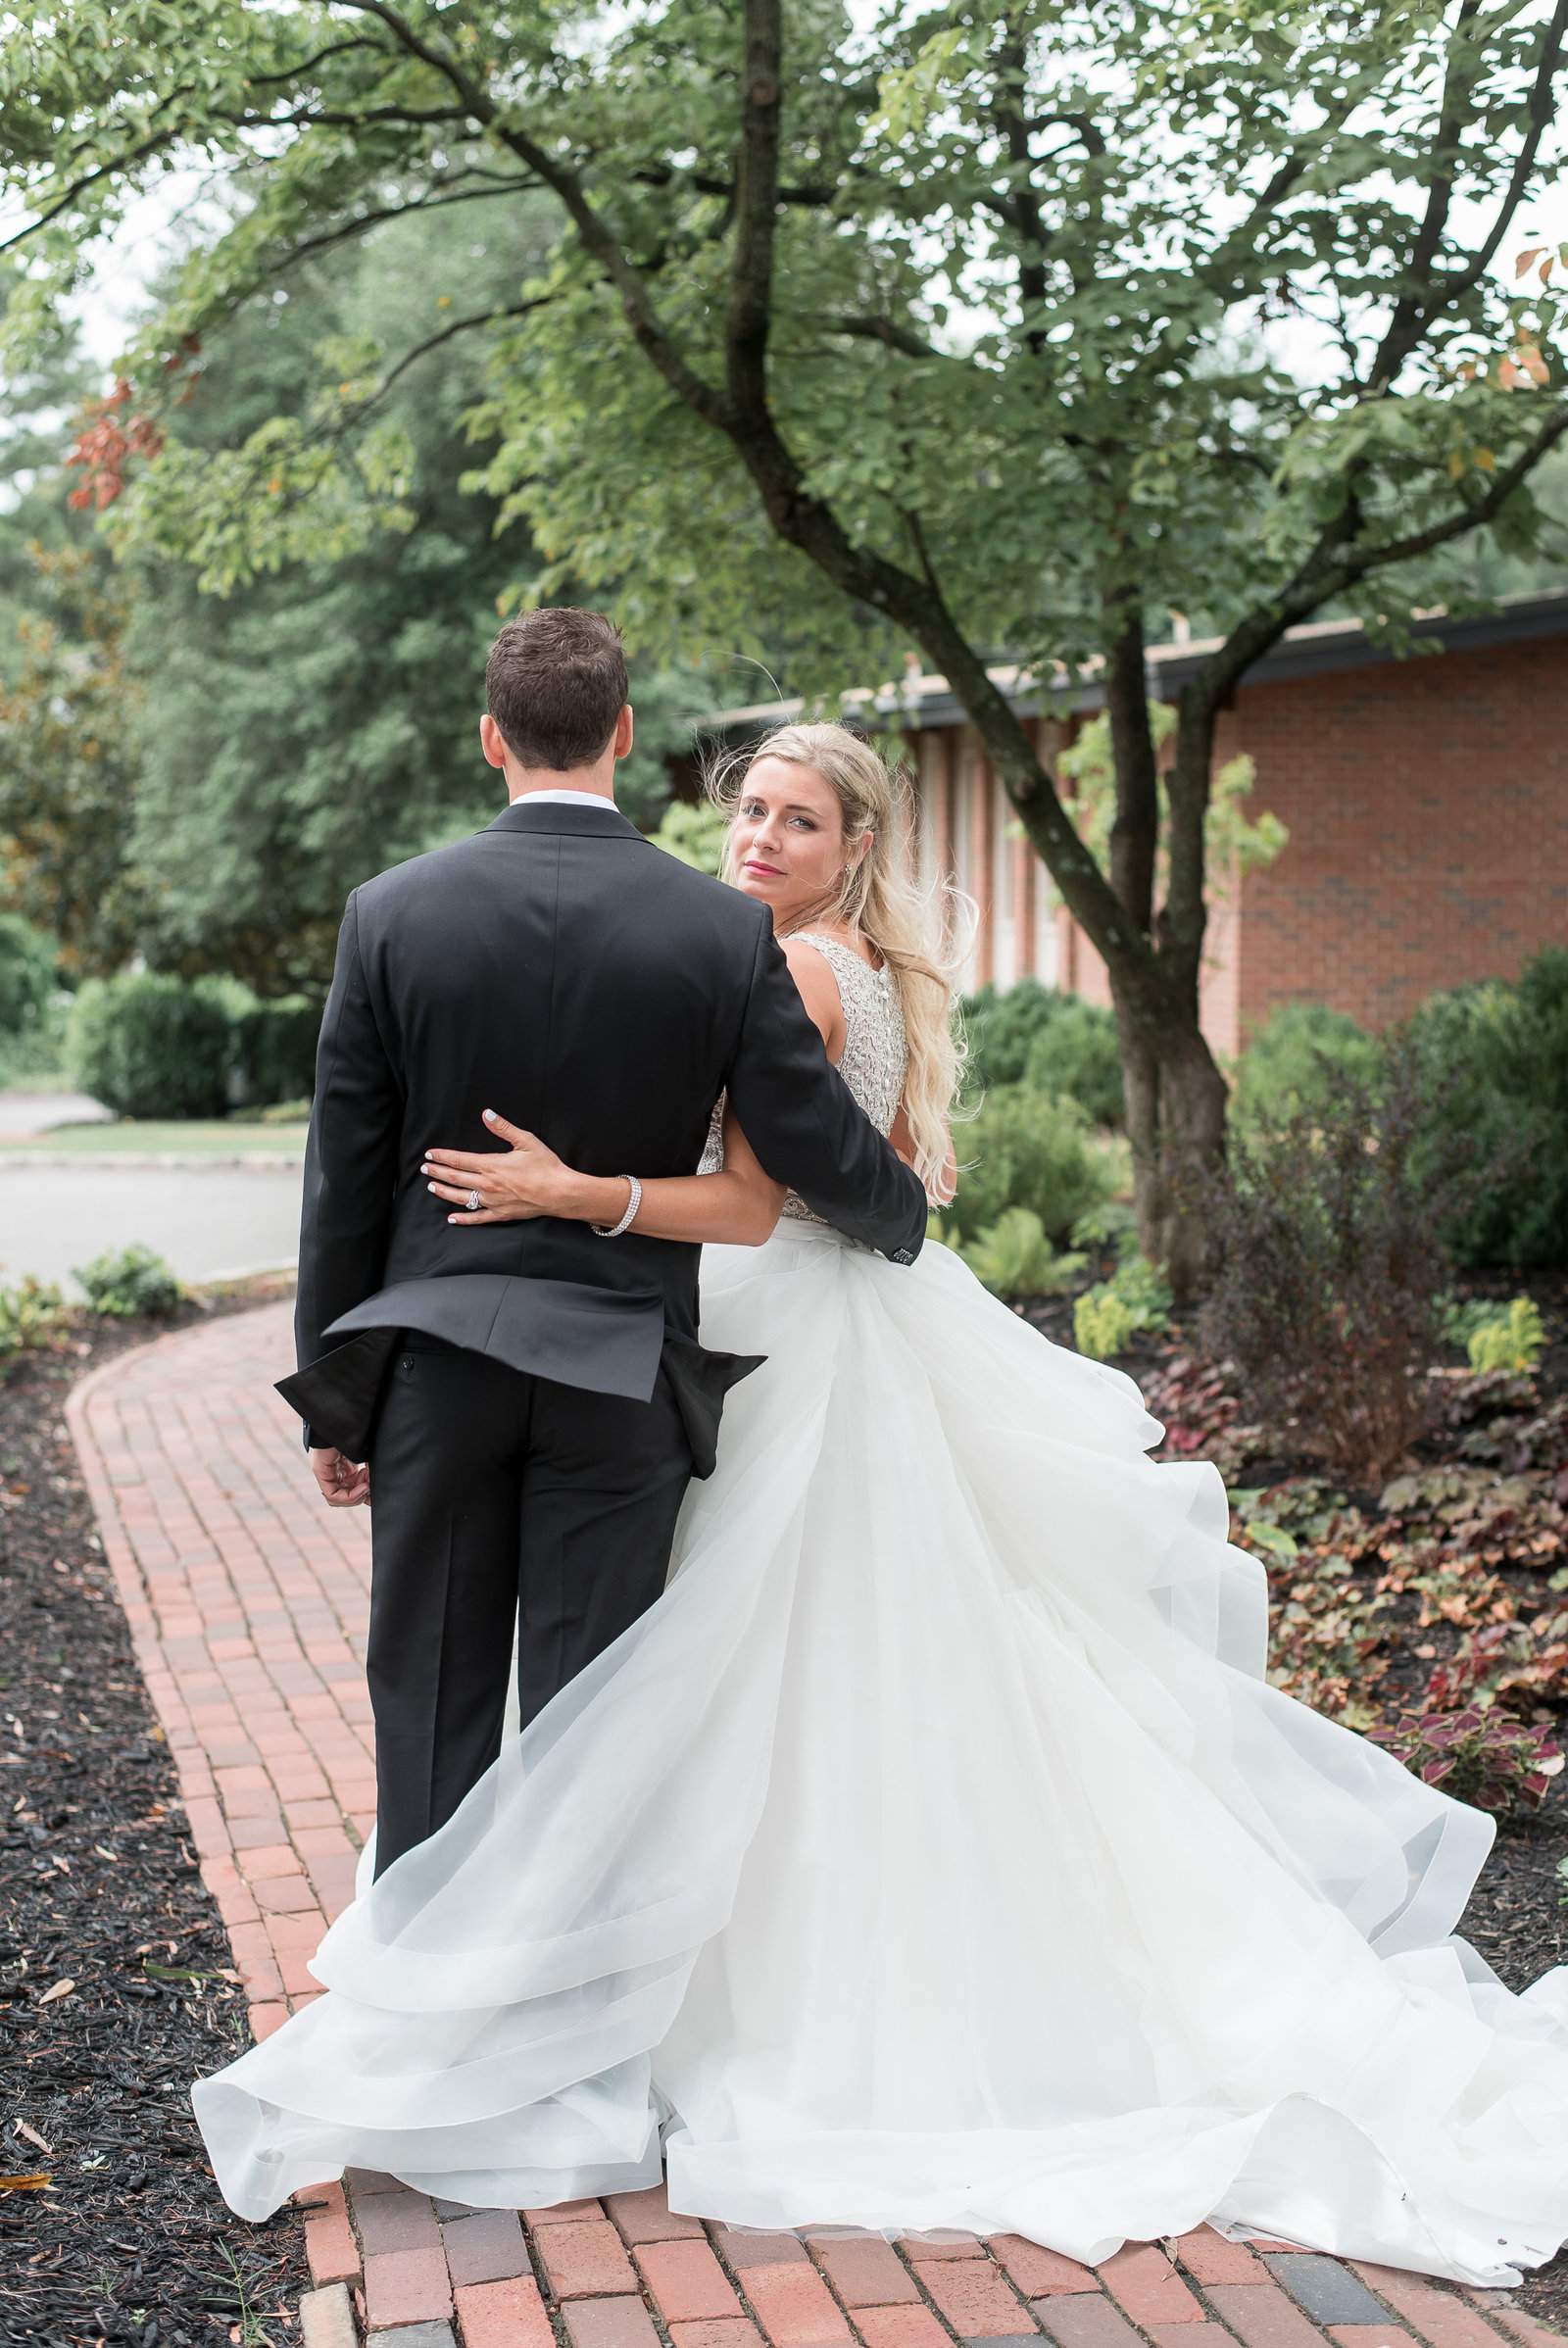 Byra-and-Nick-Willow-Oaks-Country-Club-Wedding-Melissa-Desjardins-Photography-7